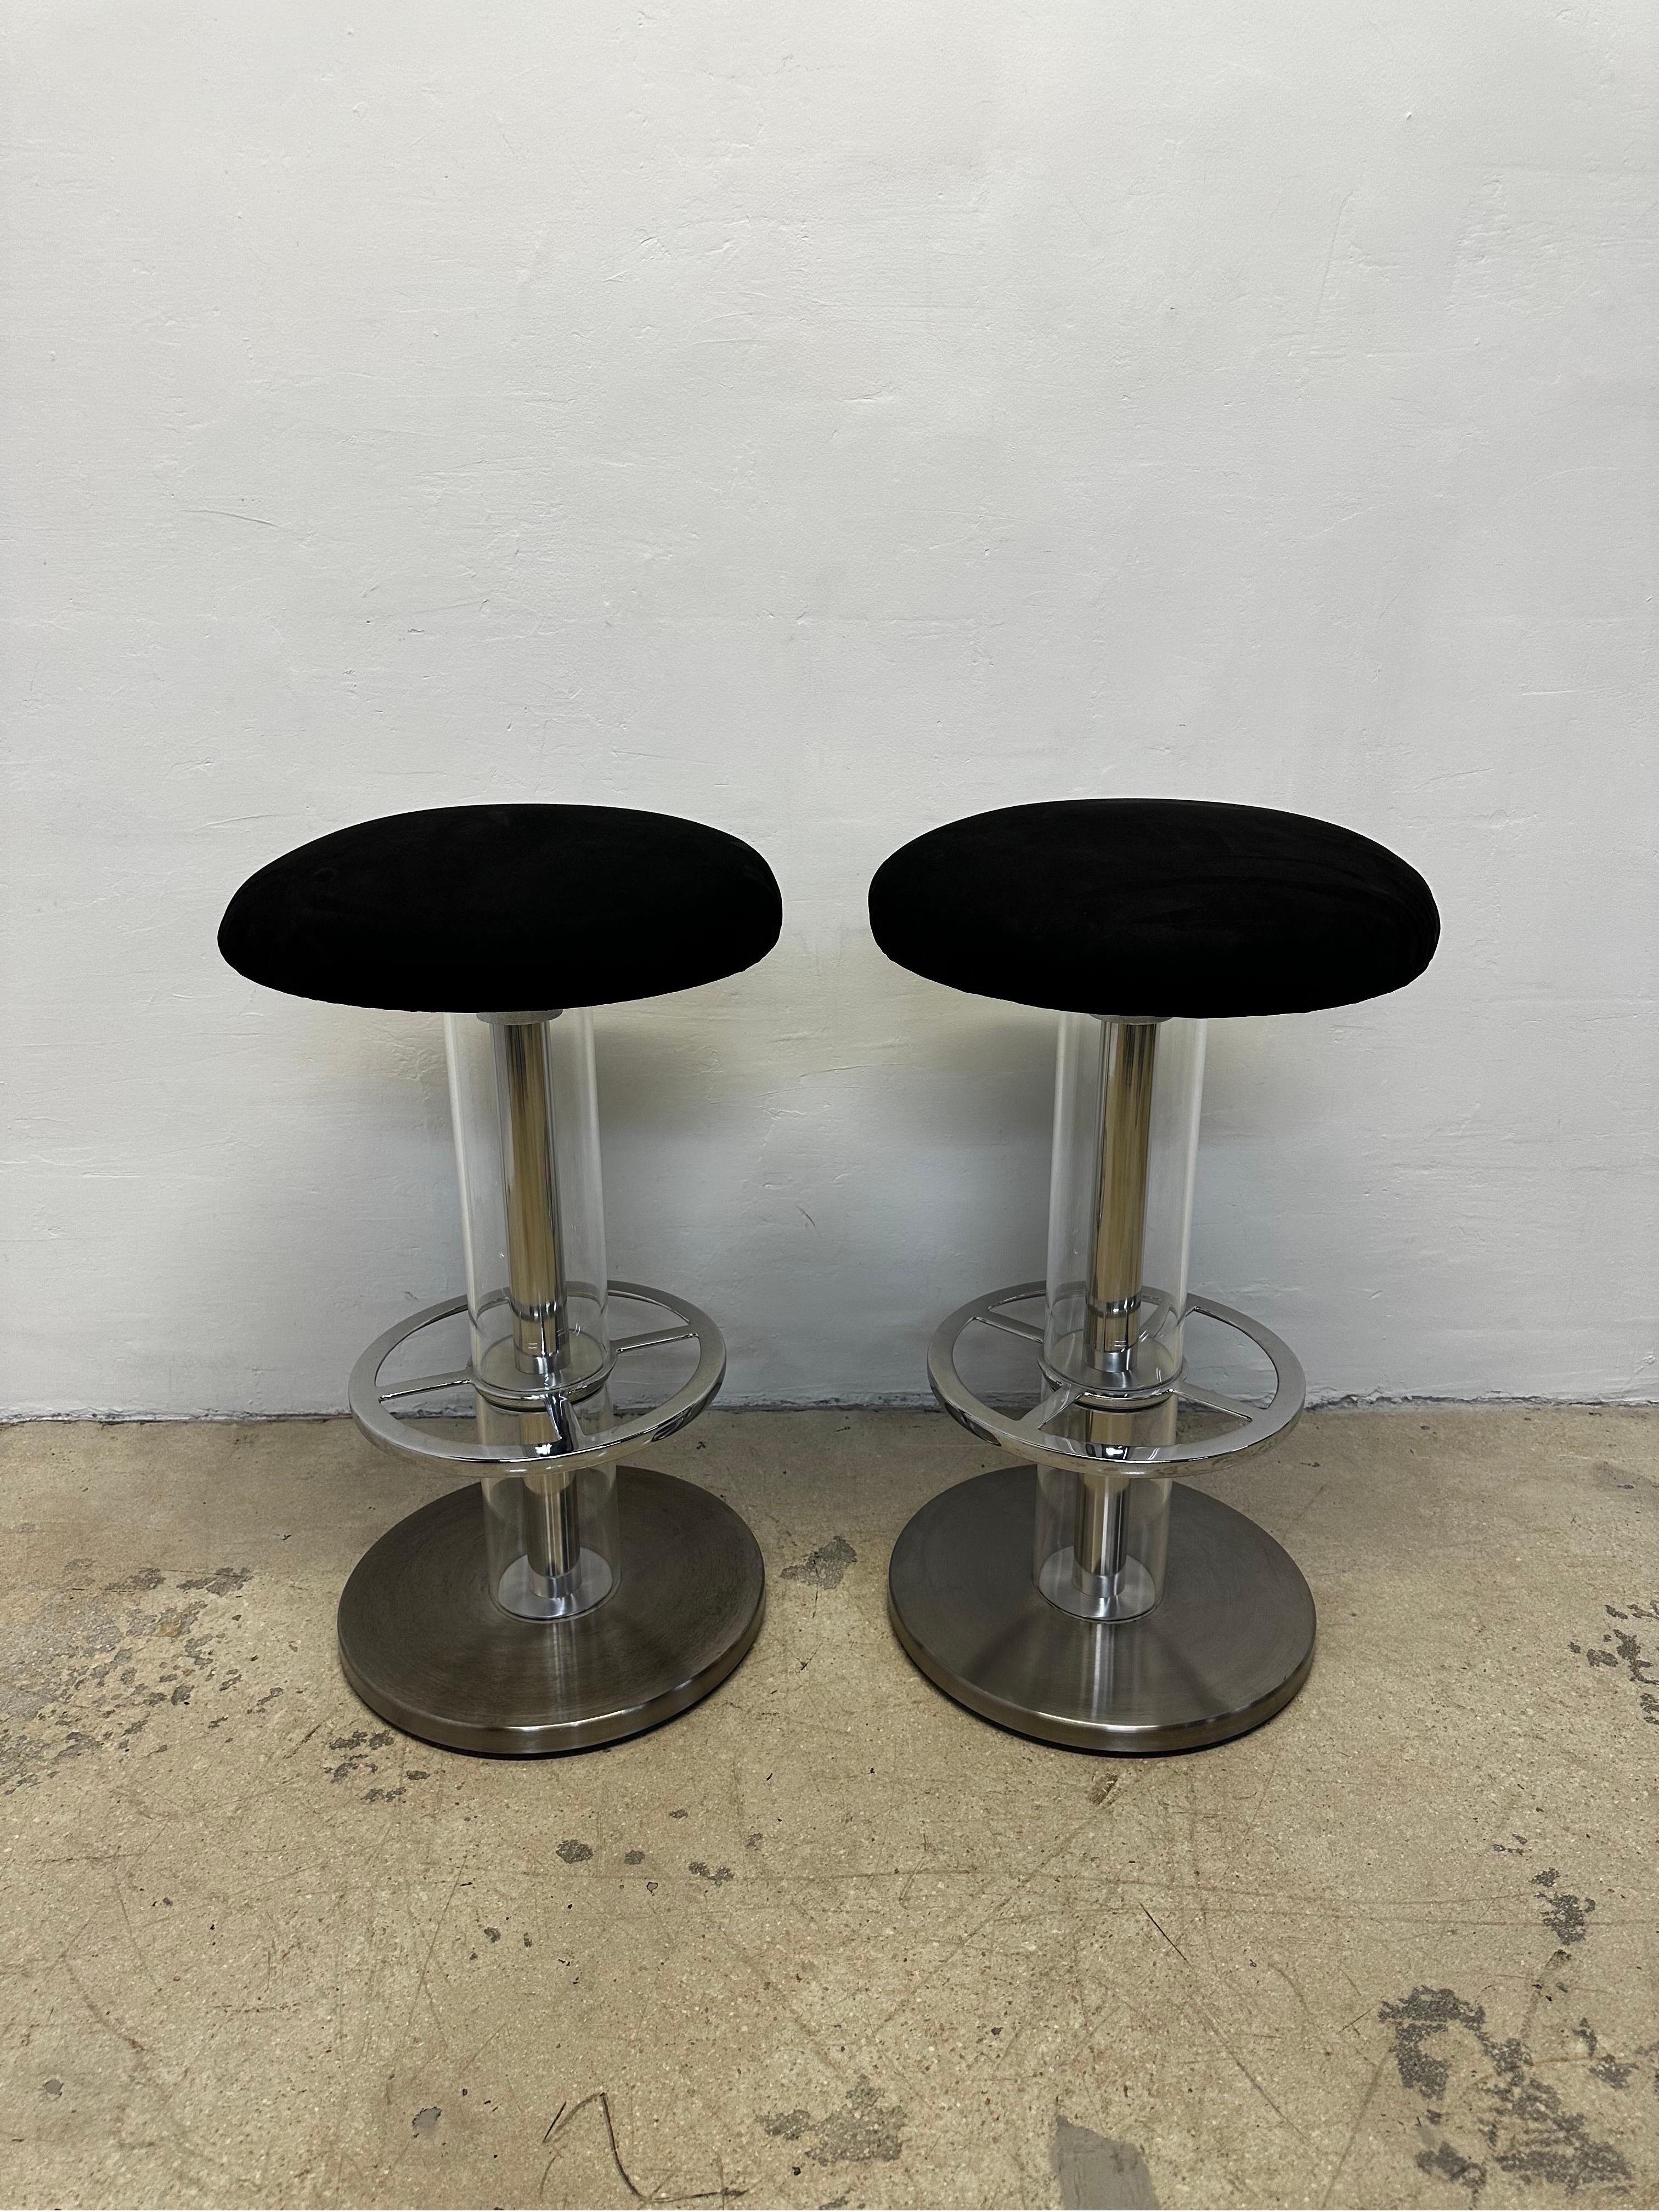 Pair of Design For Leisure bar stools with black ultra suede swivel seats supported by a steel frame base with clear acrylic tubes.